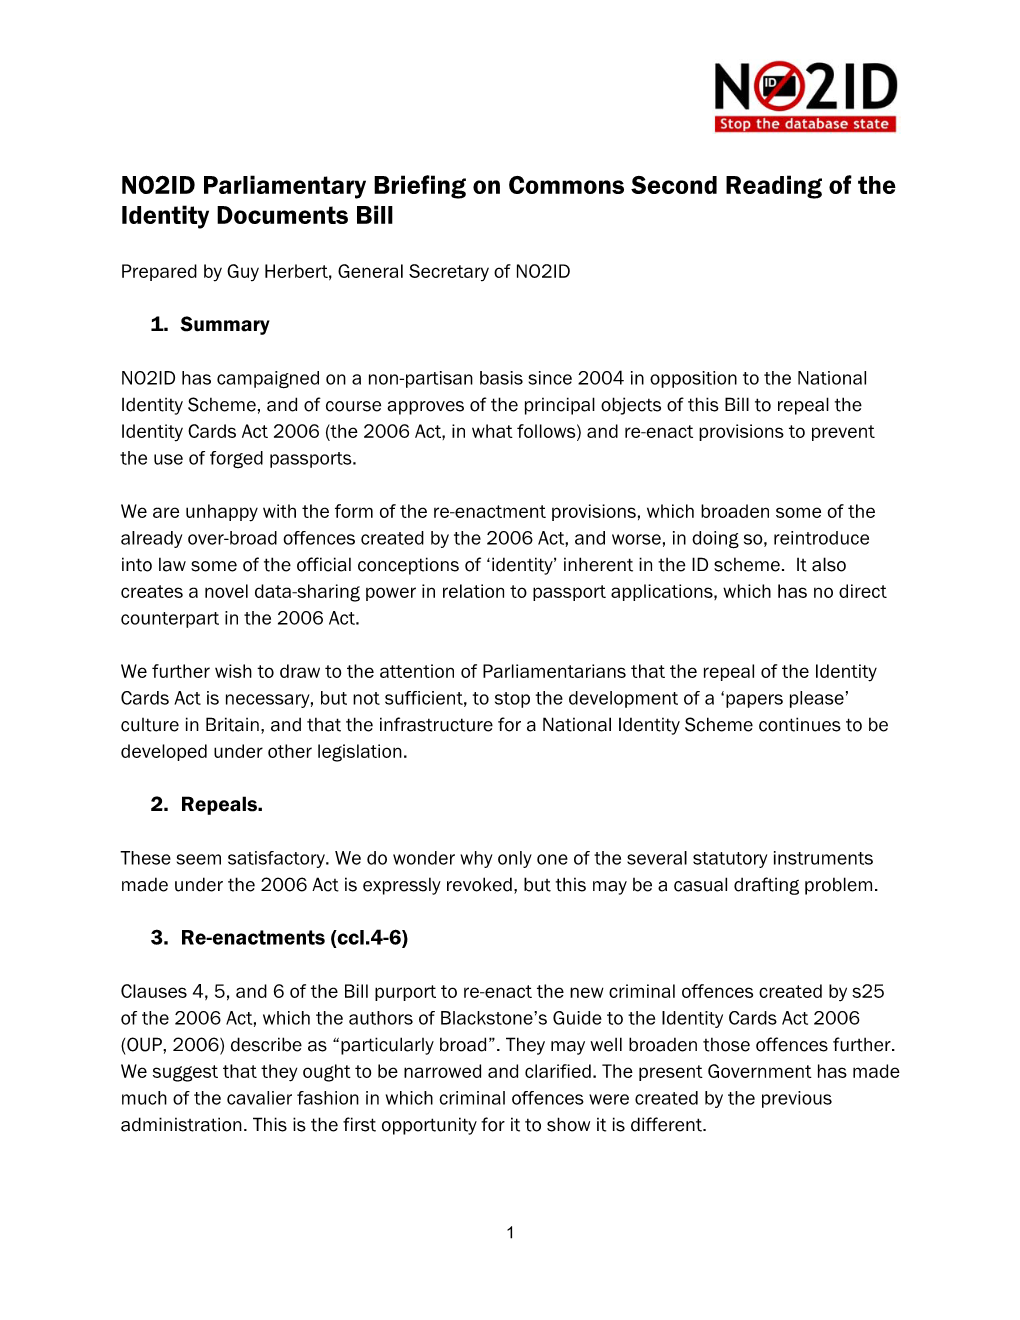 NO2ID Parliamentary Briefing on Commons Second Reading of the Identity Documents Bill